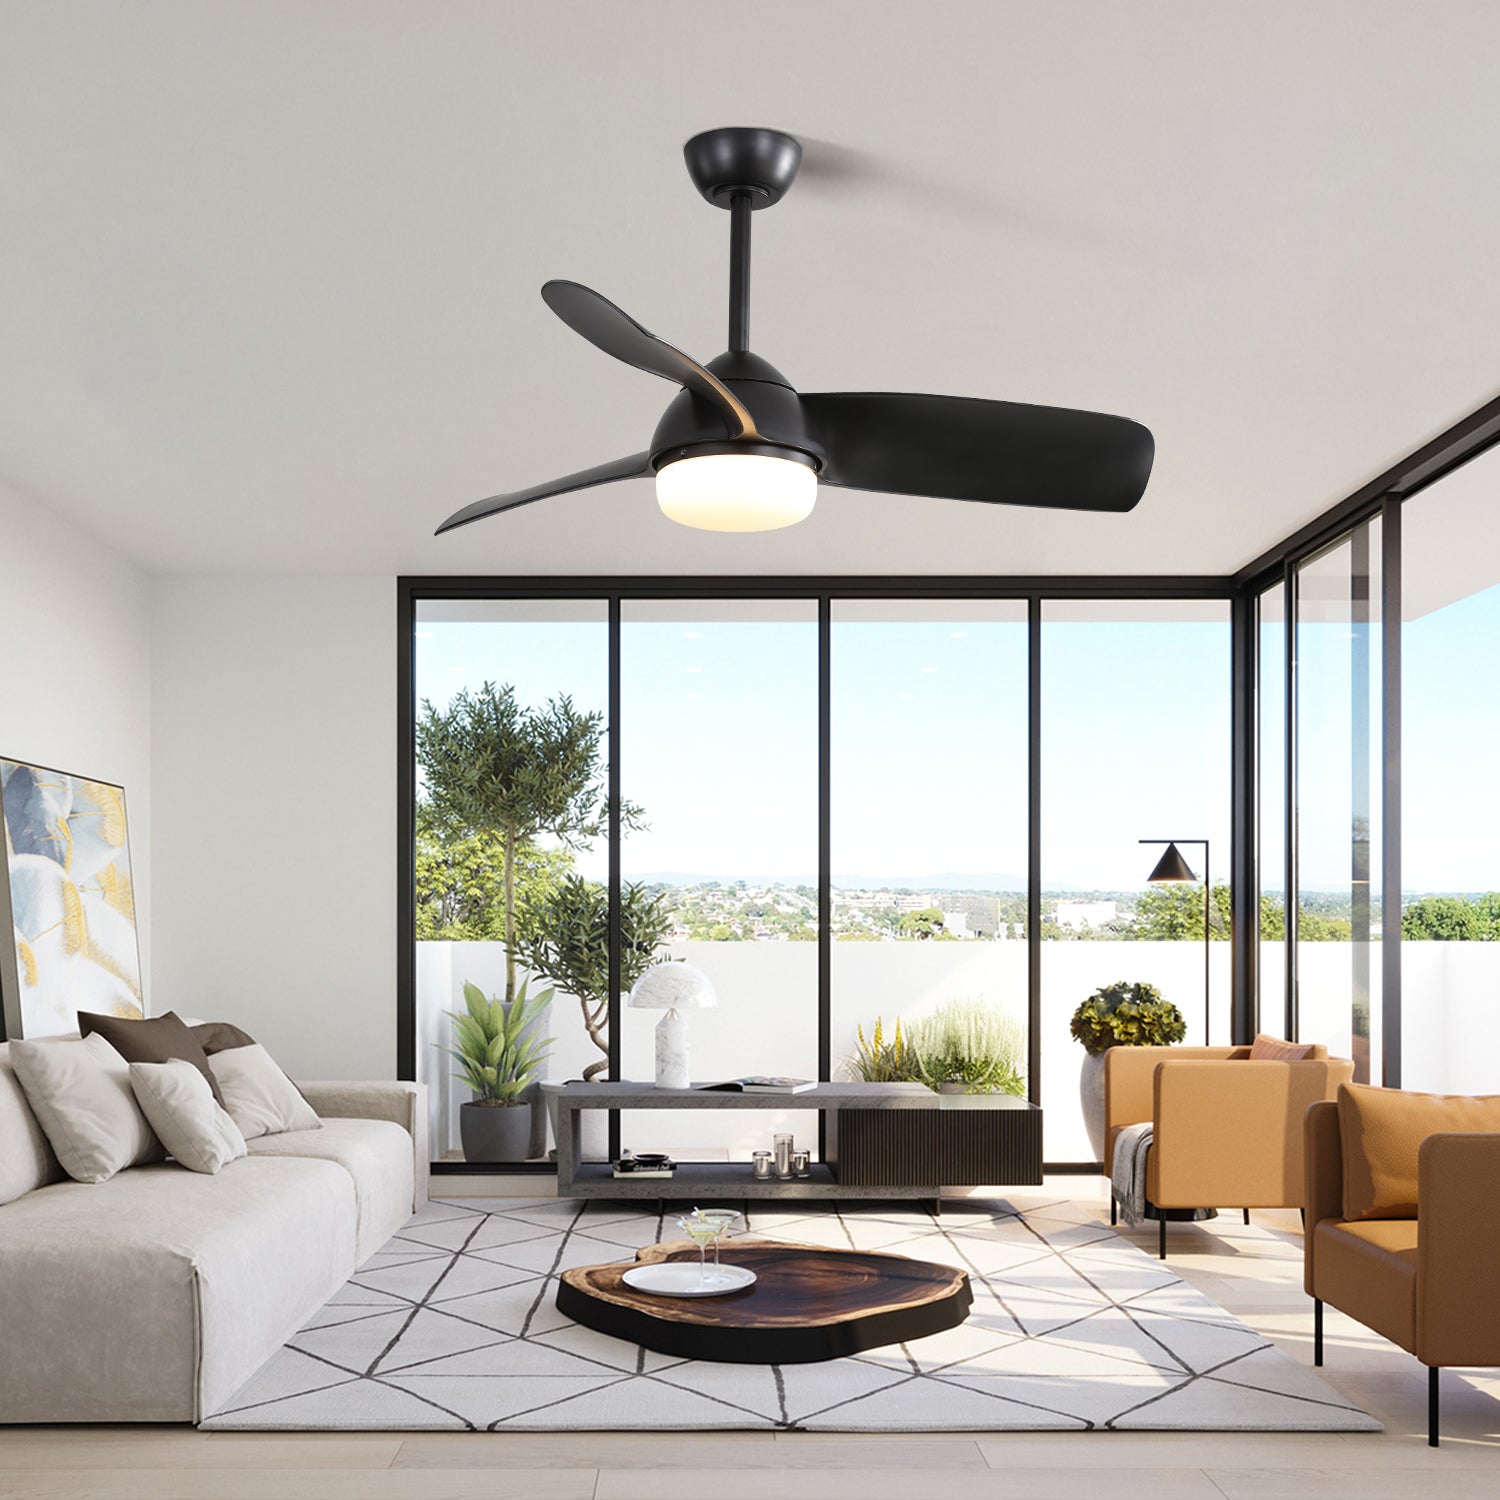 42 Inch Indoor ABS Ceiling Fan With 6 Speed Remote black-abs